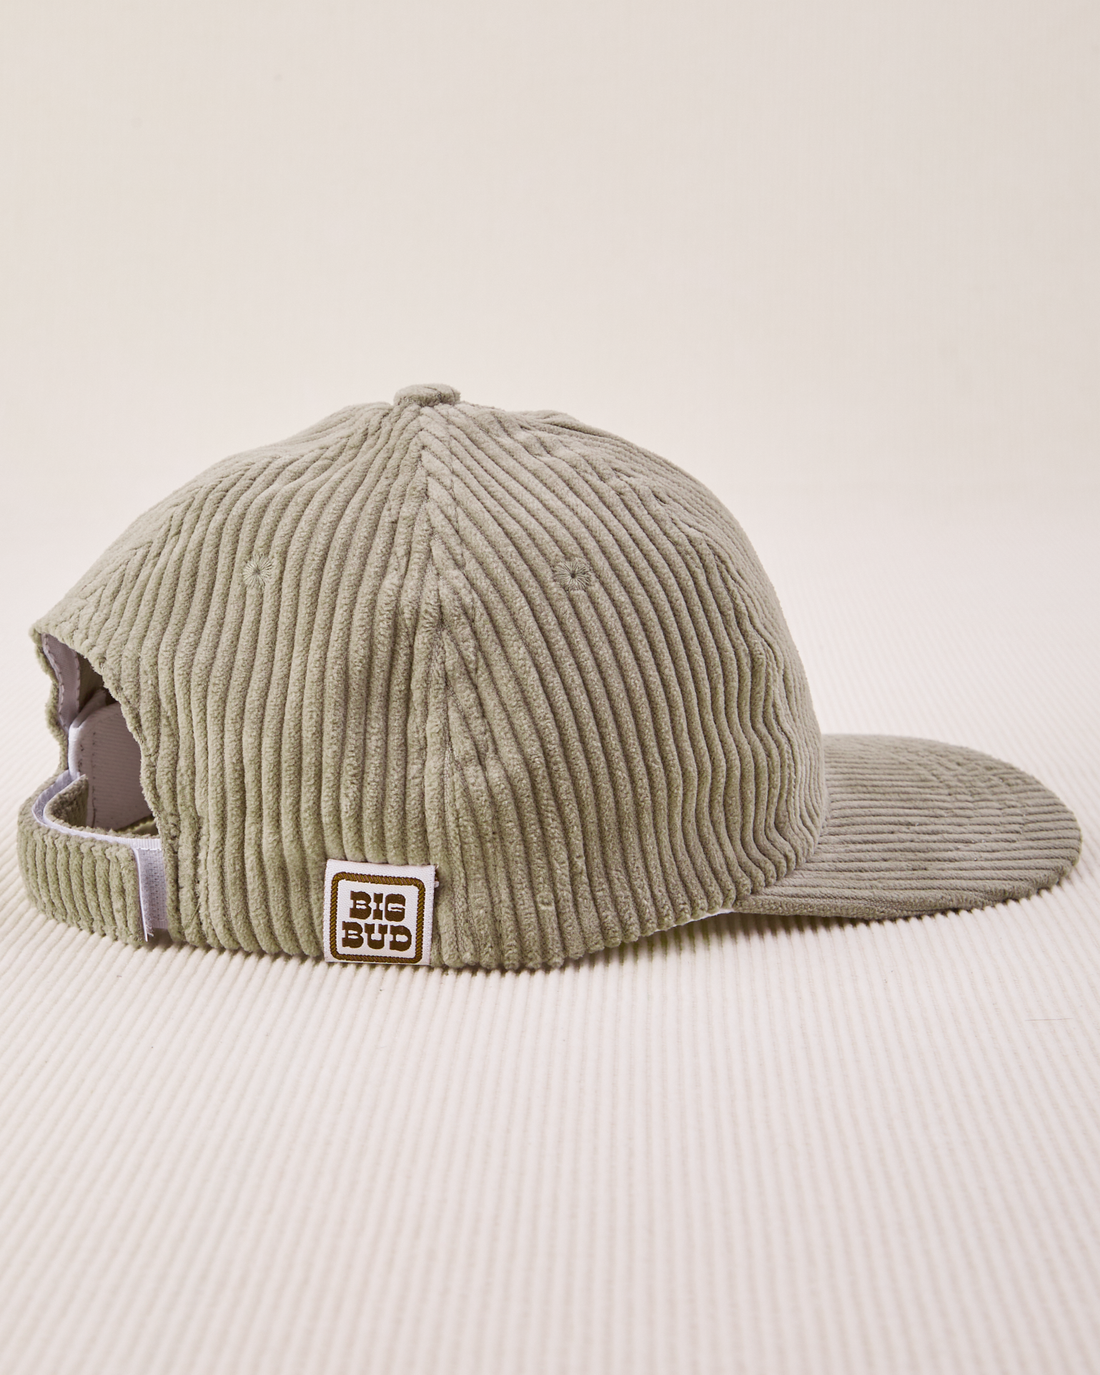 Side view Dugout Corduroy Hat in Khaki Grey. Big Bud label sewn on edge of hat.